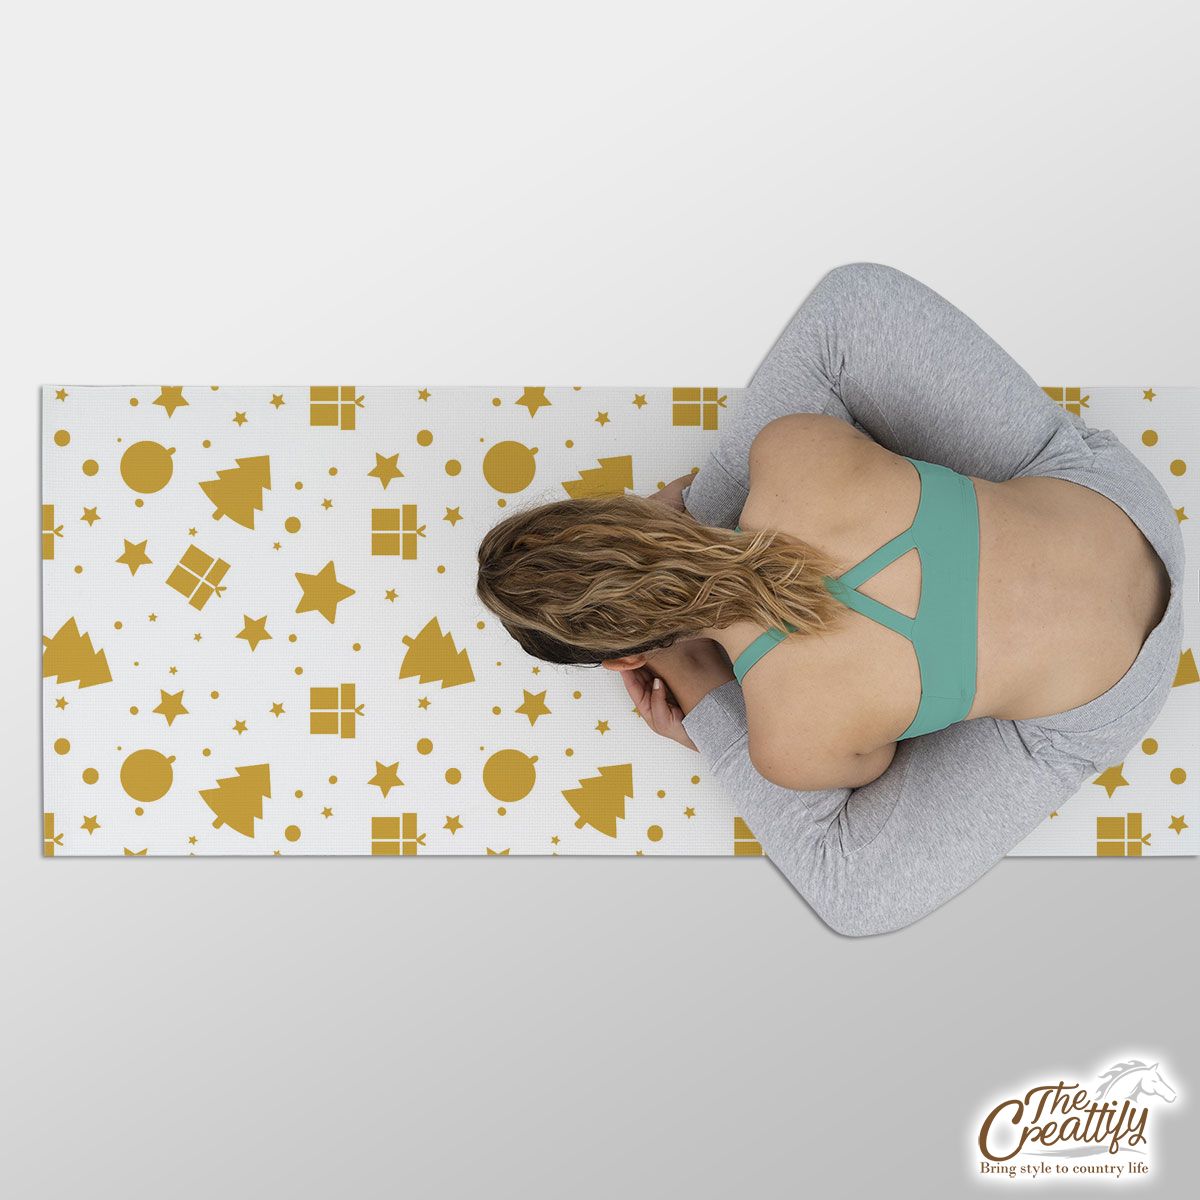 Christmas Gifts, Baudles And Pine Tree Silhouette Filled In Gold Color Pattern Yoga Mat